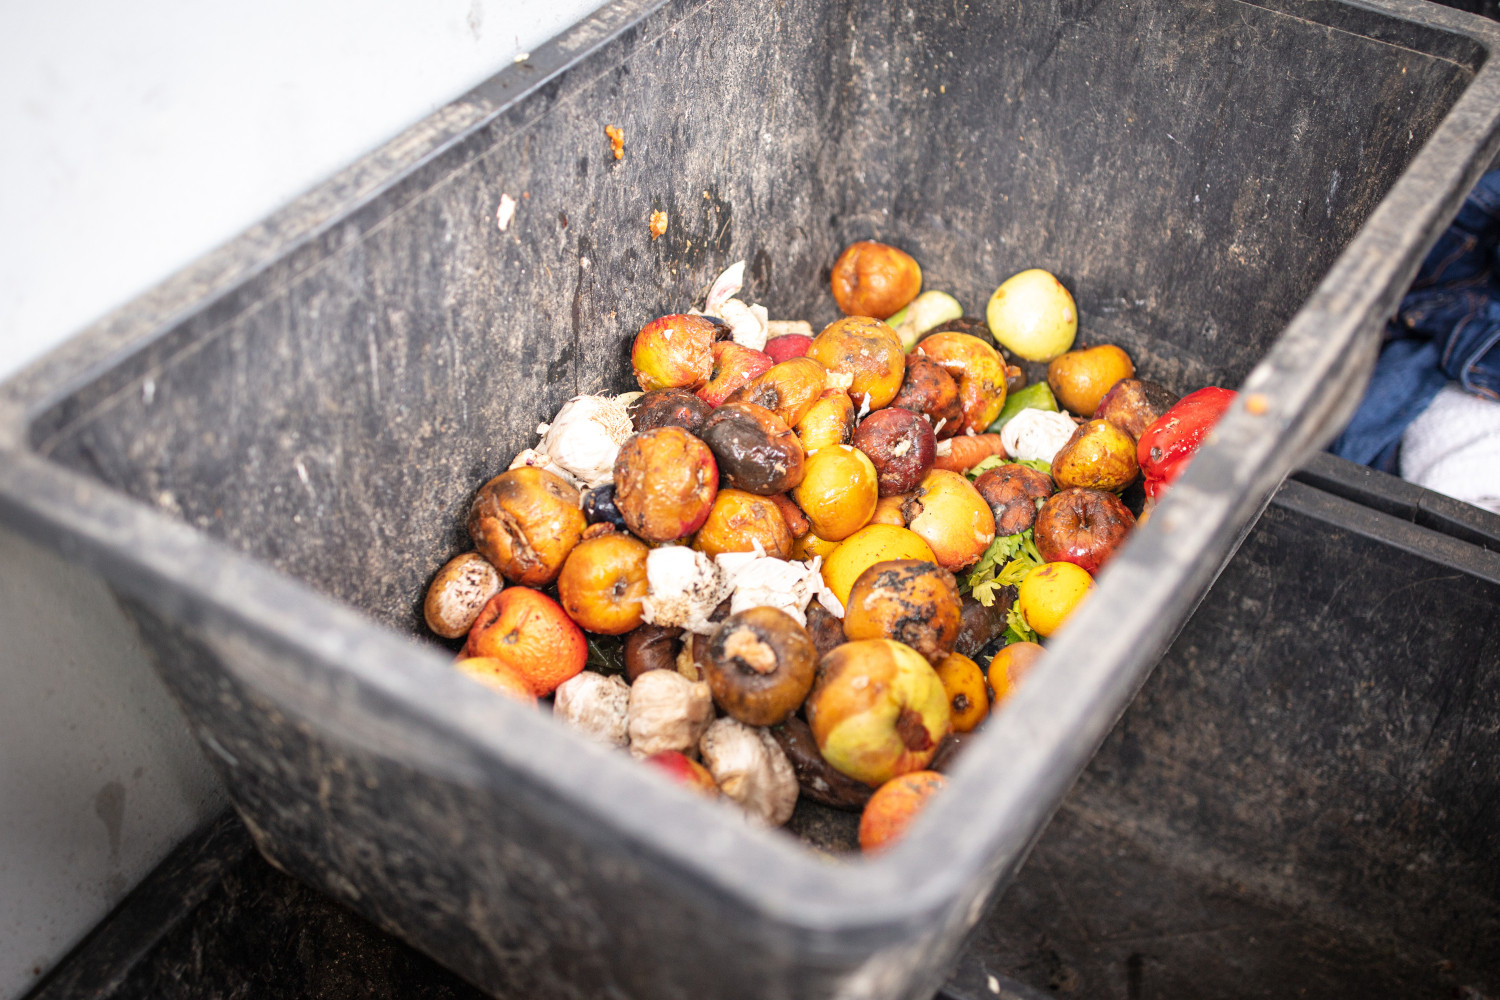 Food waste in a container